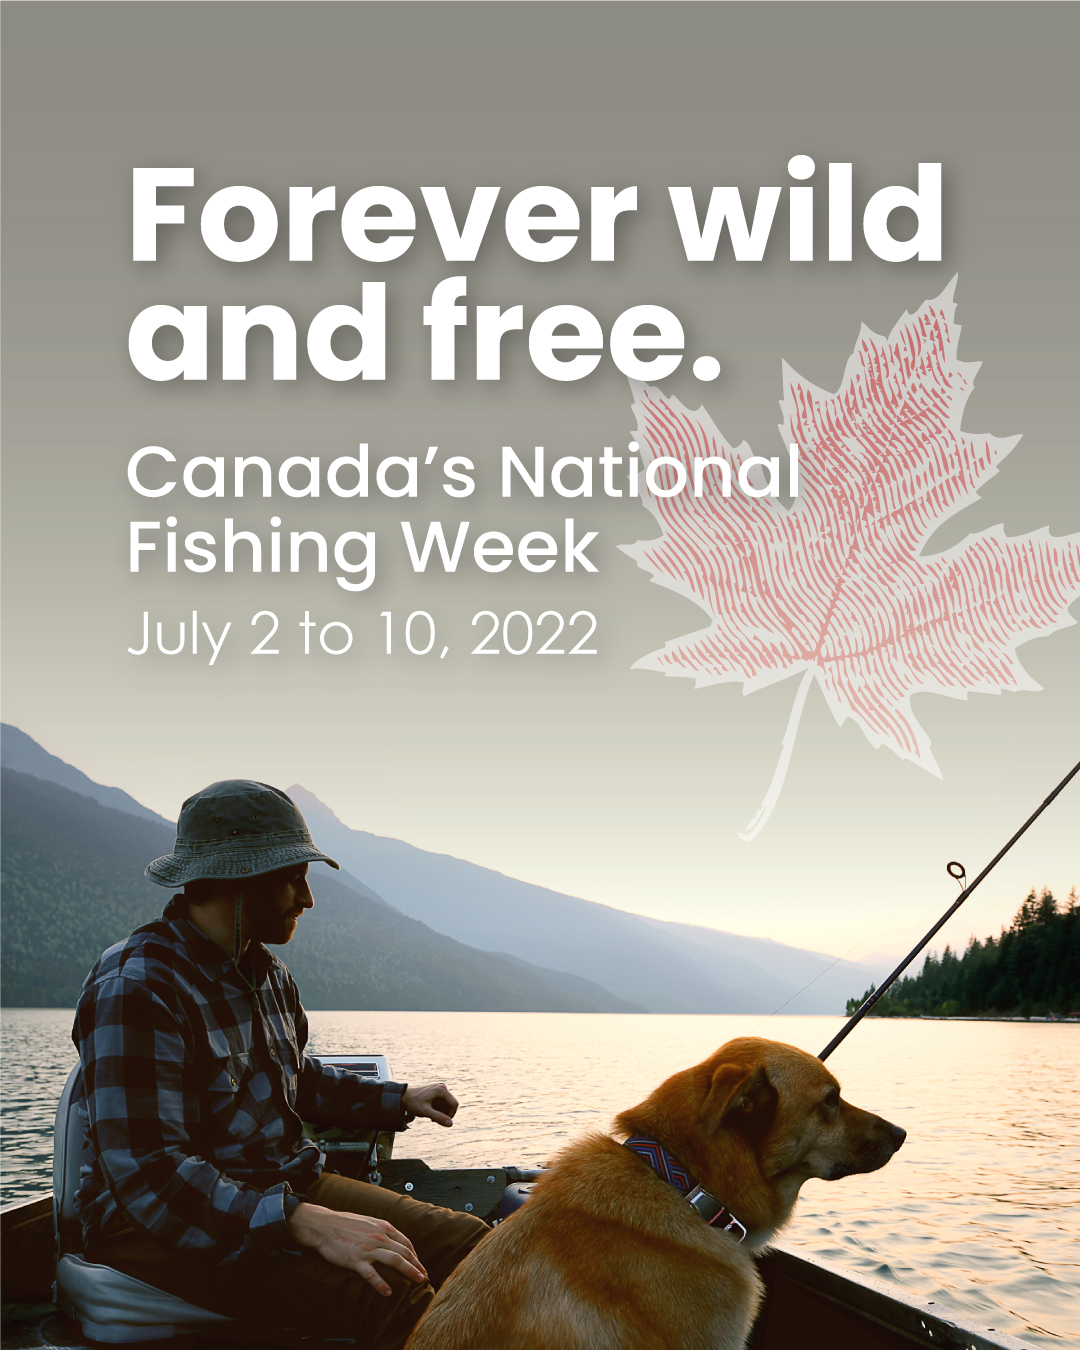 Canada's National Fishing Week. Forver wild and free.